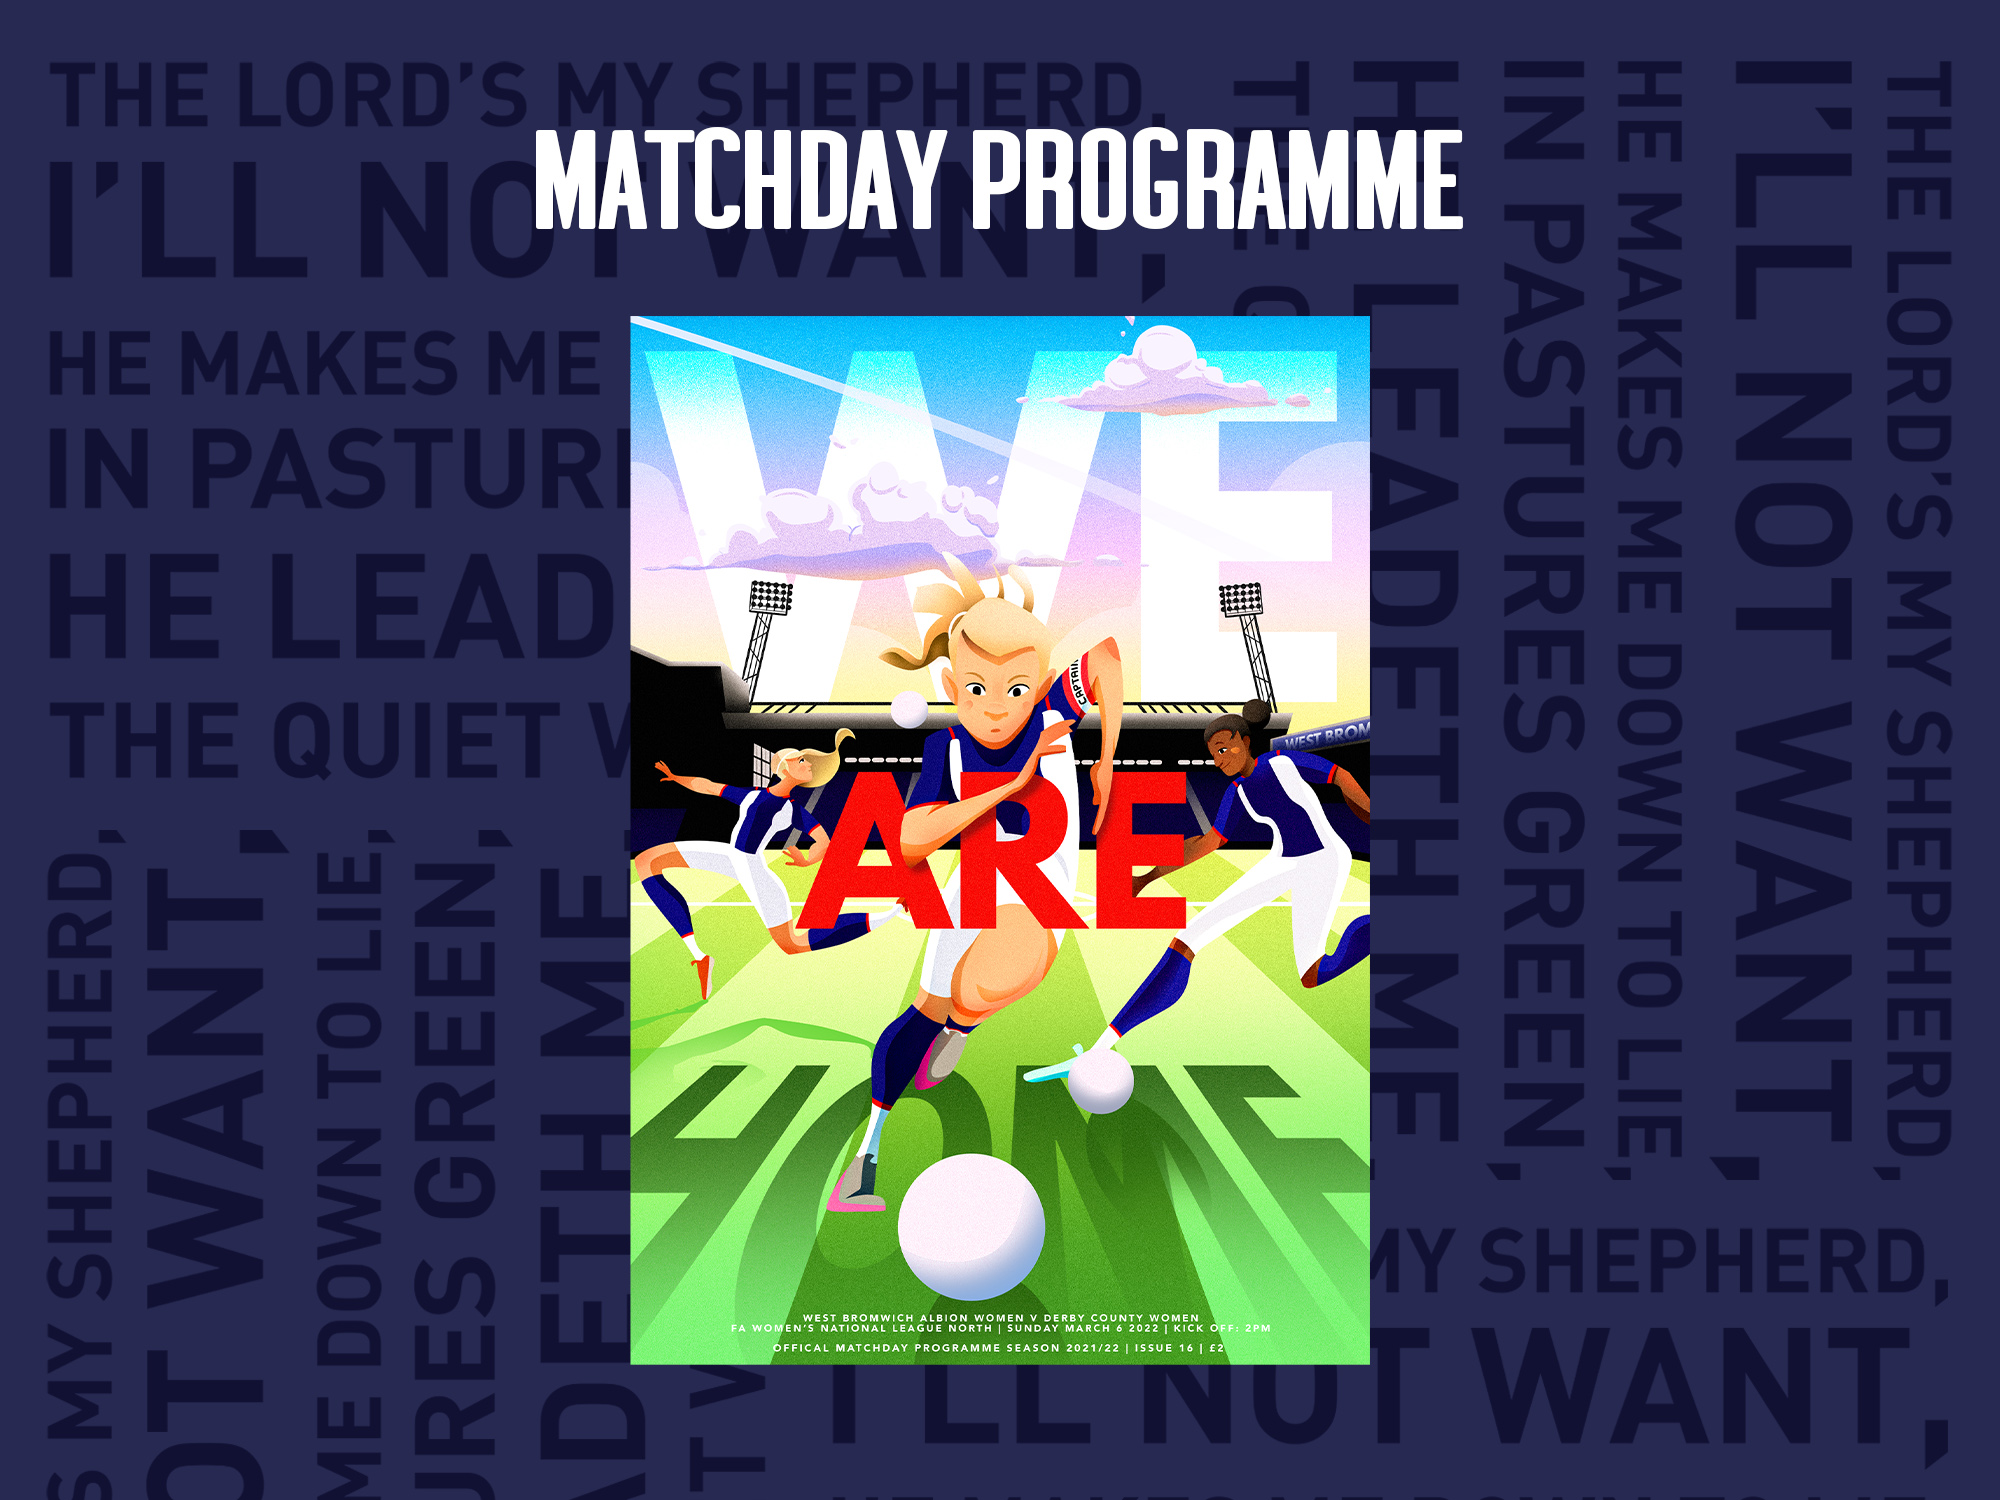 The programme cover for Albion Women's first ever Hawthorns game